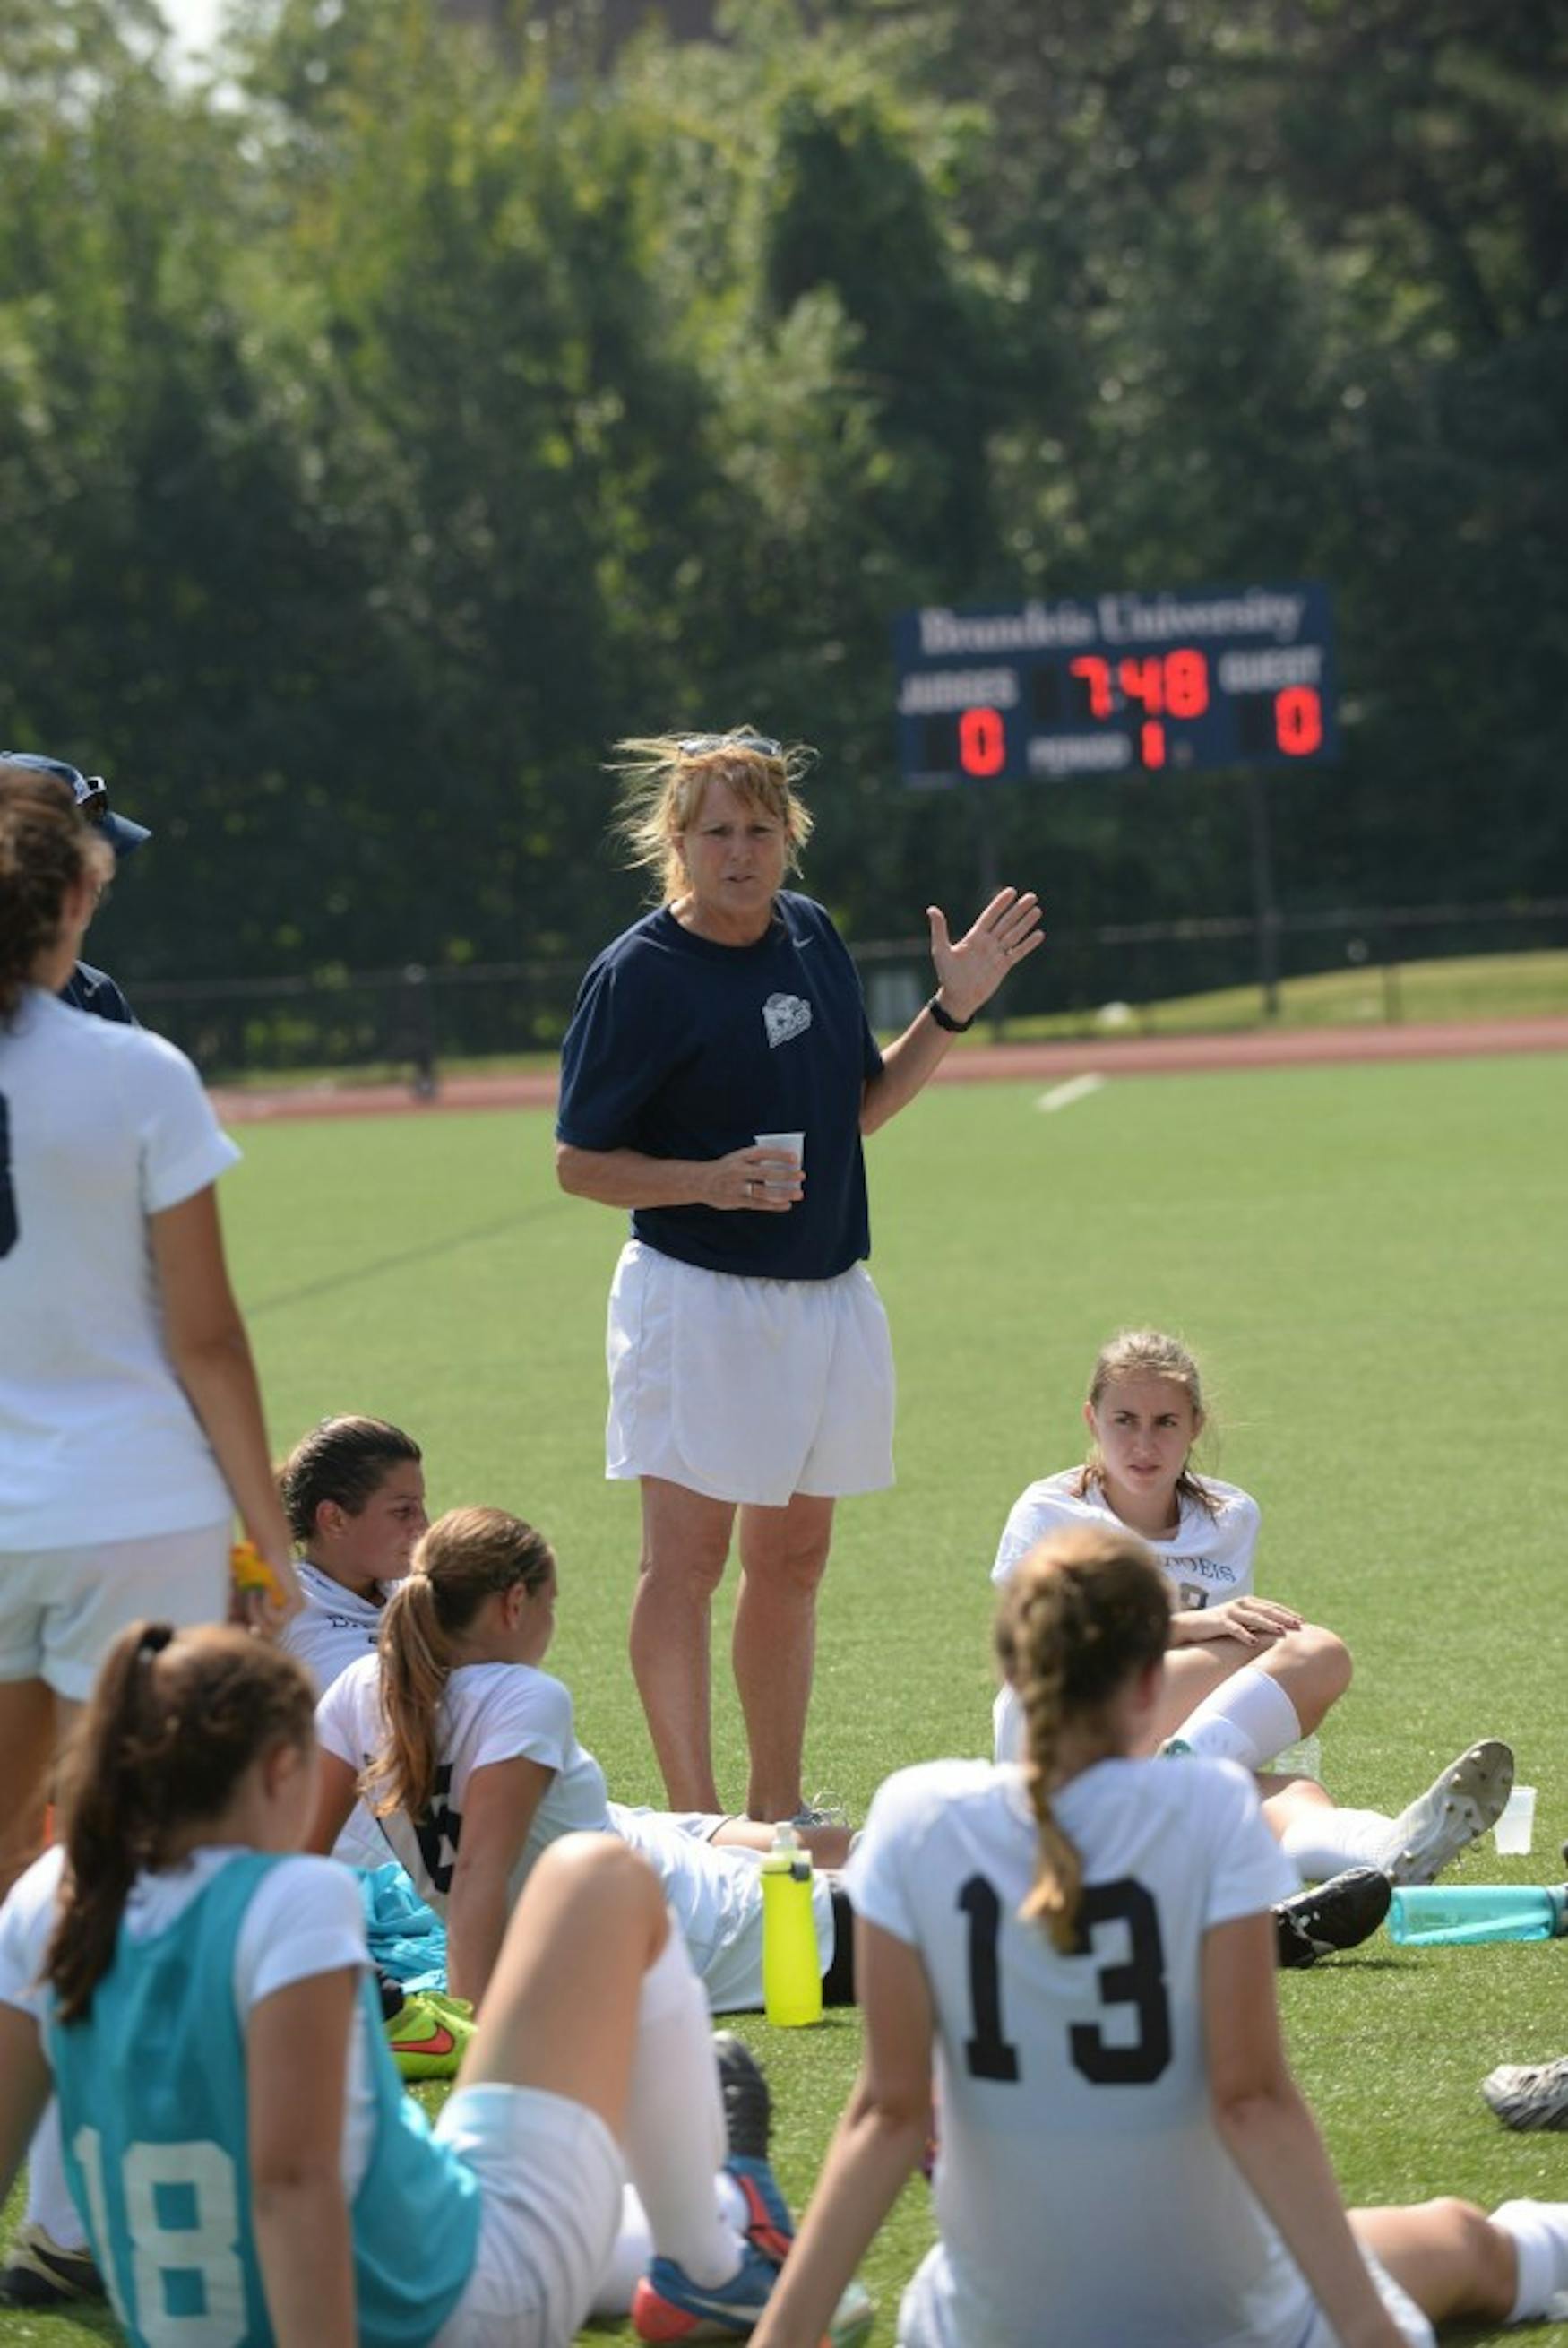 PEP TALK: Coach Denise Dallamora (center), who earned her 300th career victory on Aug. 31., addresses her team on Saturday.